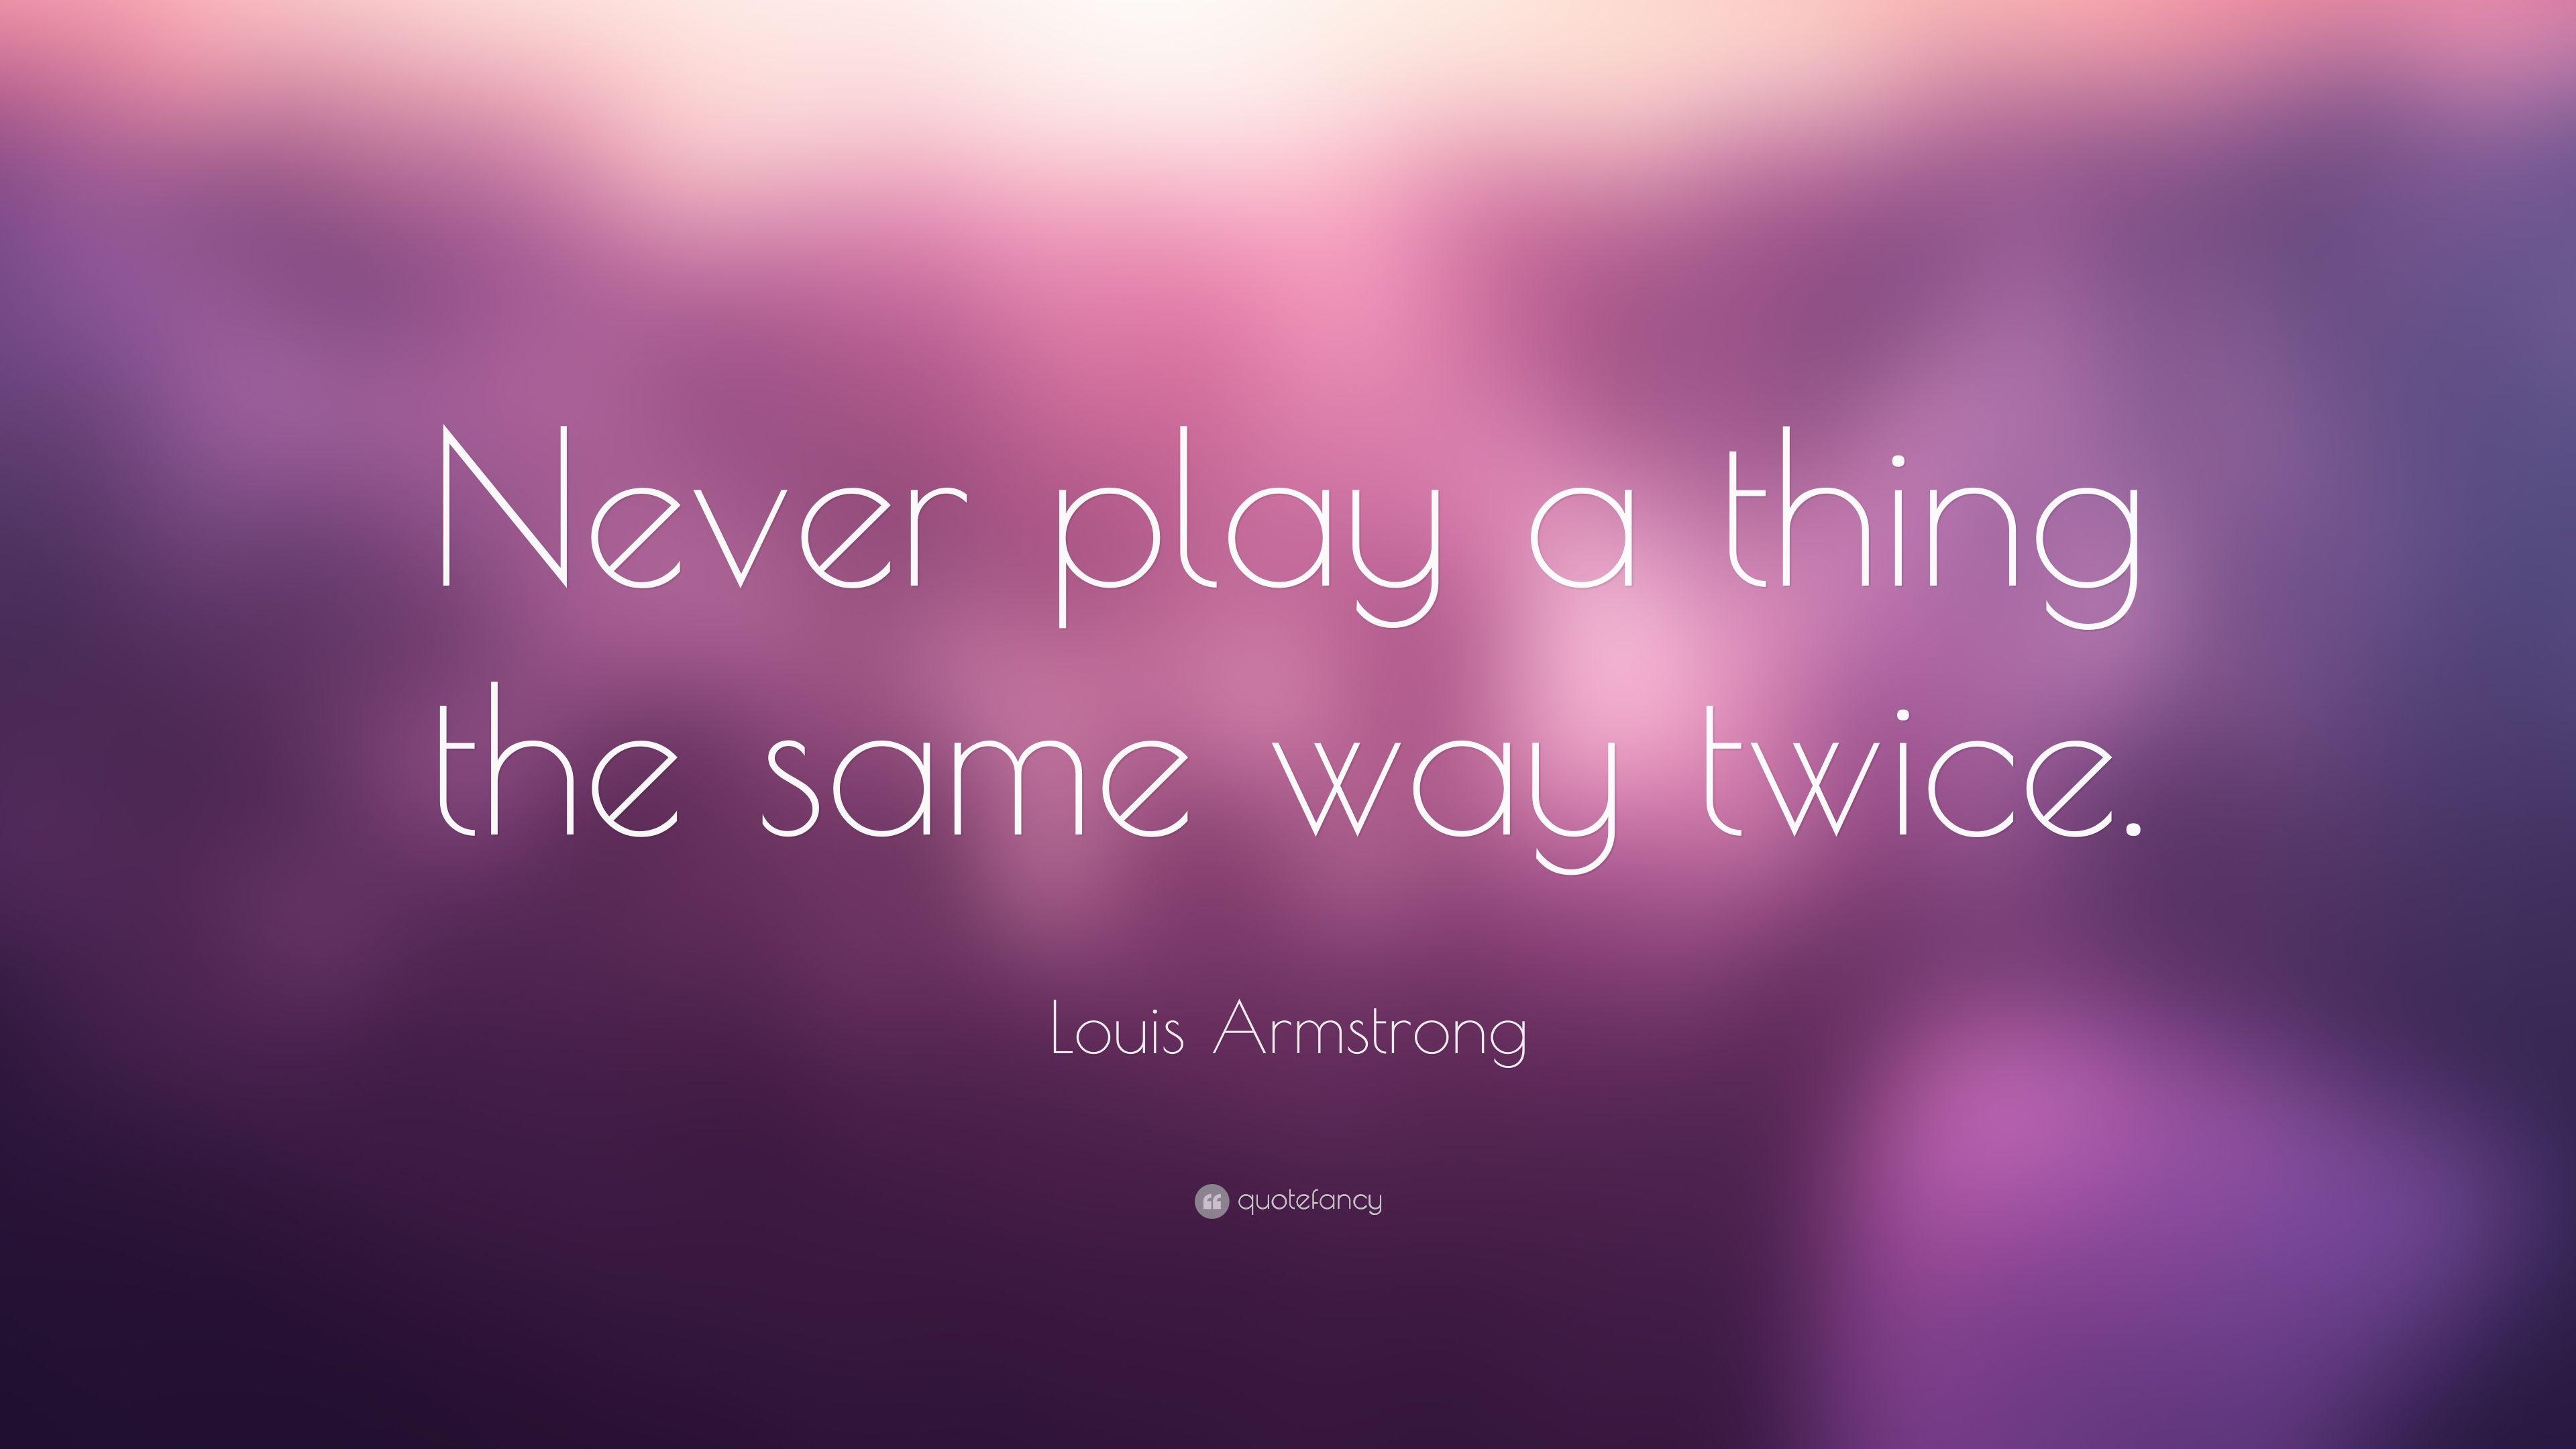 Louis Armstrong Quote: “Never play a thing the same way twice.” 9